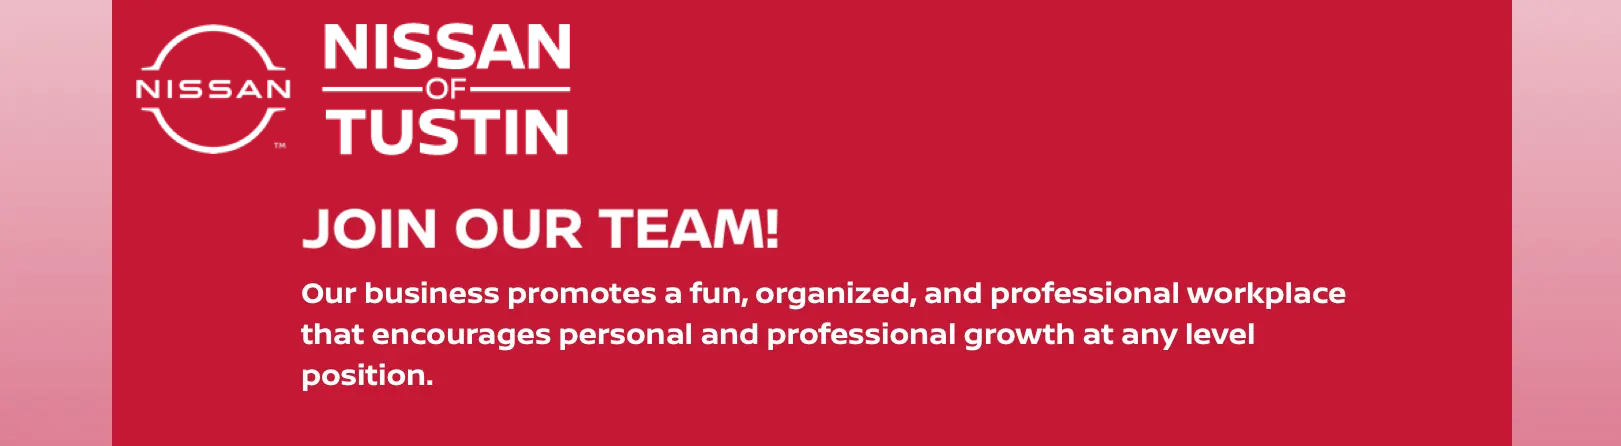 Join Our Team! Our business promotes a fun, orgnaized, and professional workplace that encourages personal and professional growth at any level postion